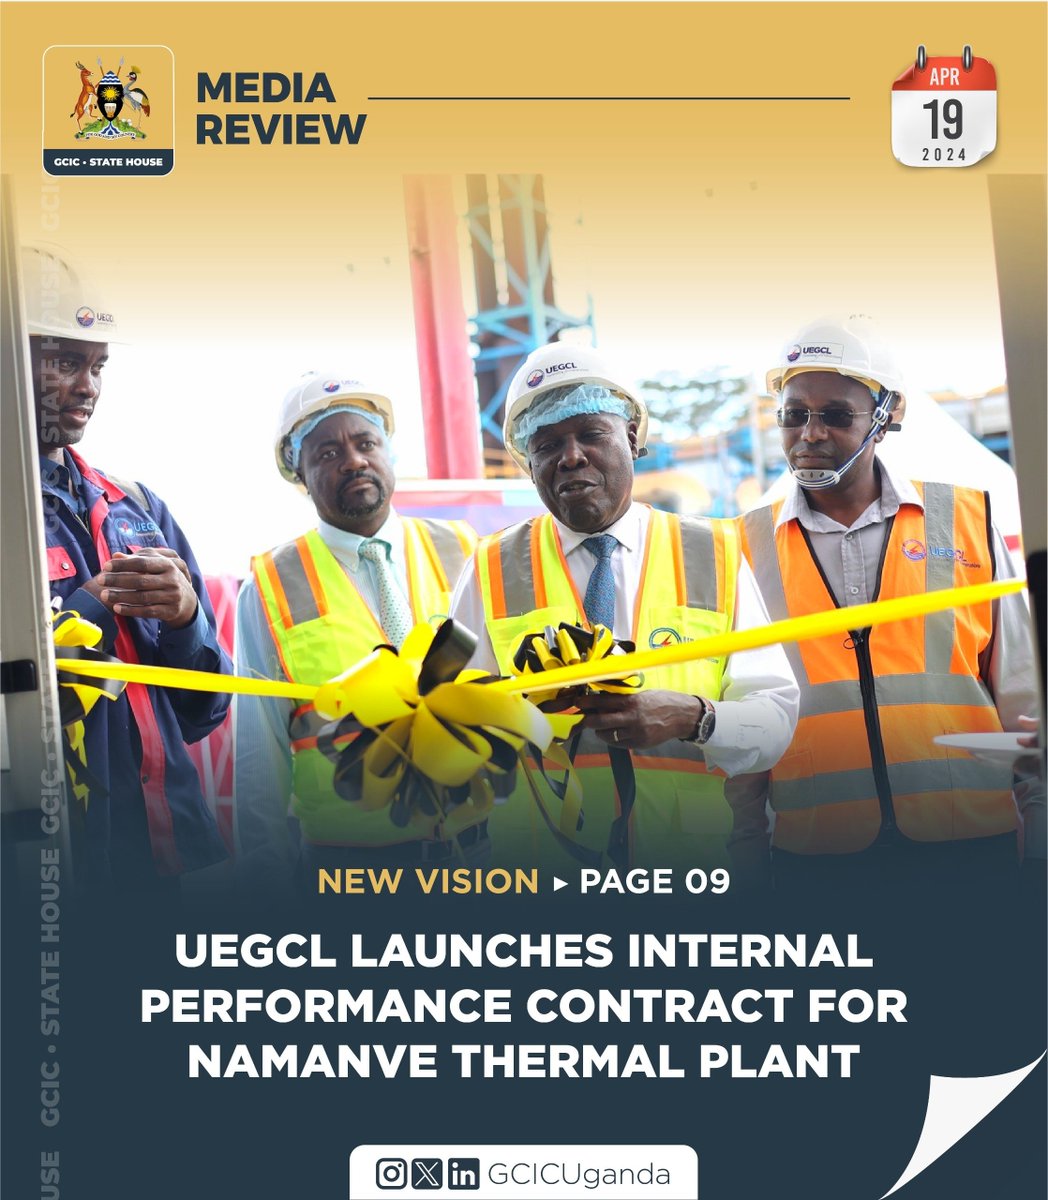 The @UegclOfficial has launched an internal performance contract for the Namanve thermal plant. Read about other stories from the #GCICMediaReview here: media.gcic.go.ug/gcicmediarevie…